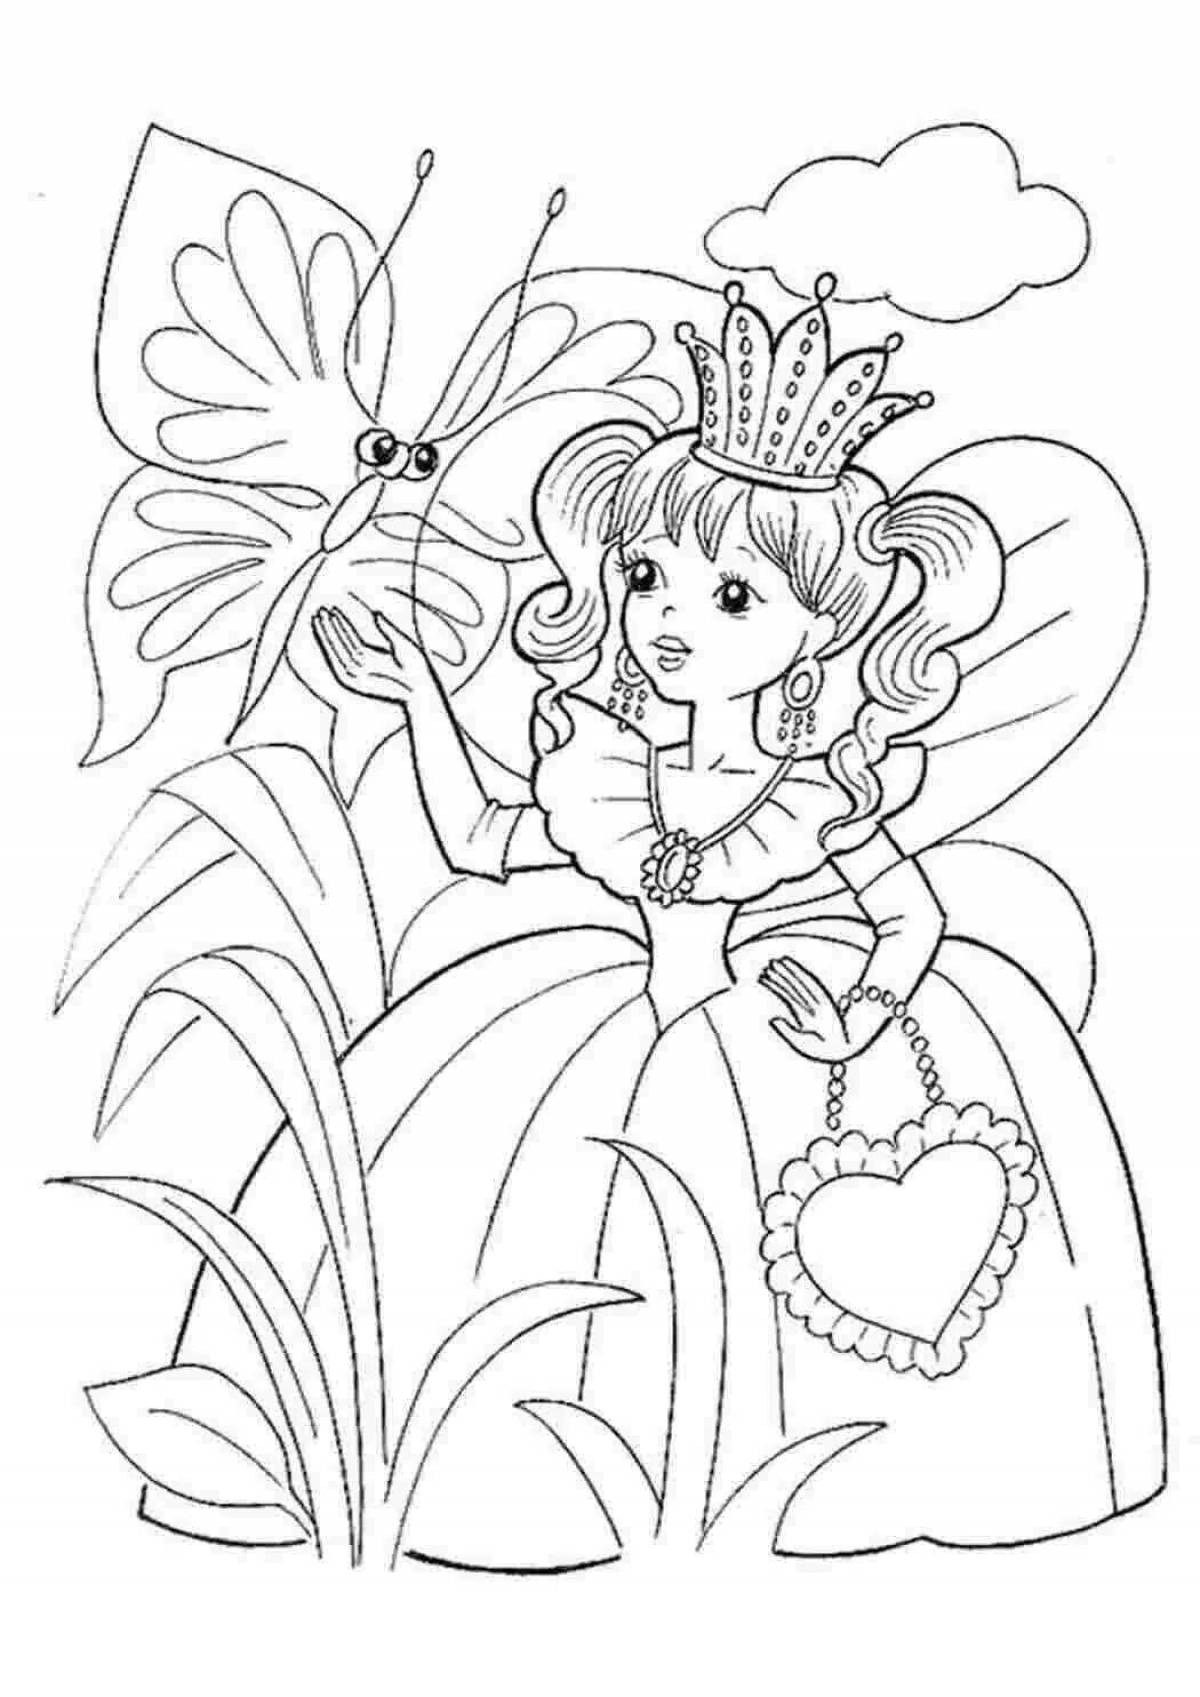 Violent fairy tale coloring for girls